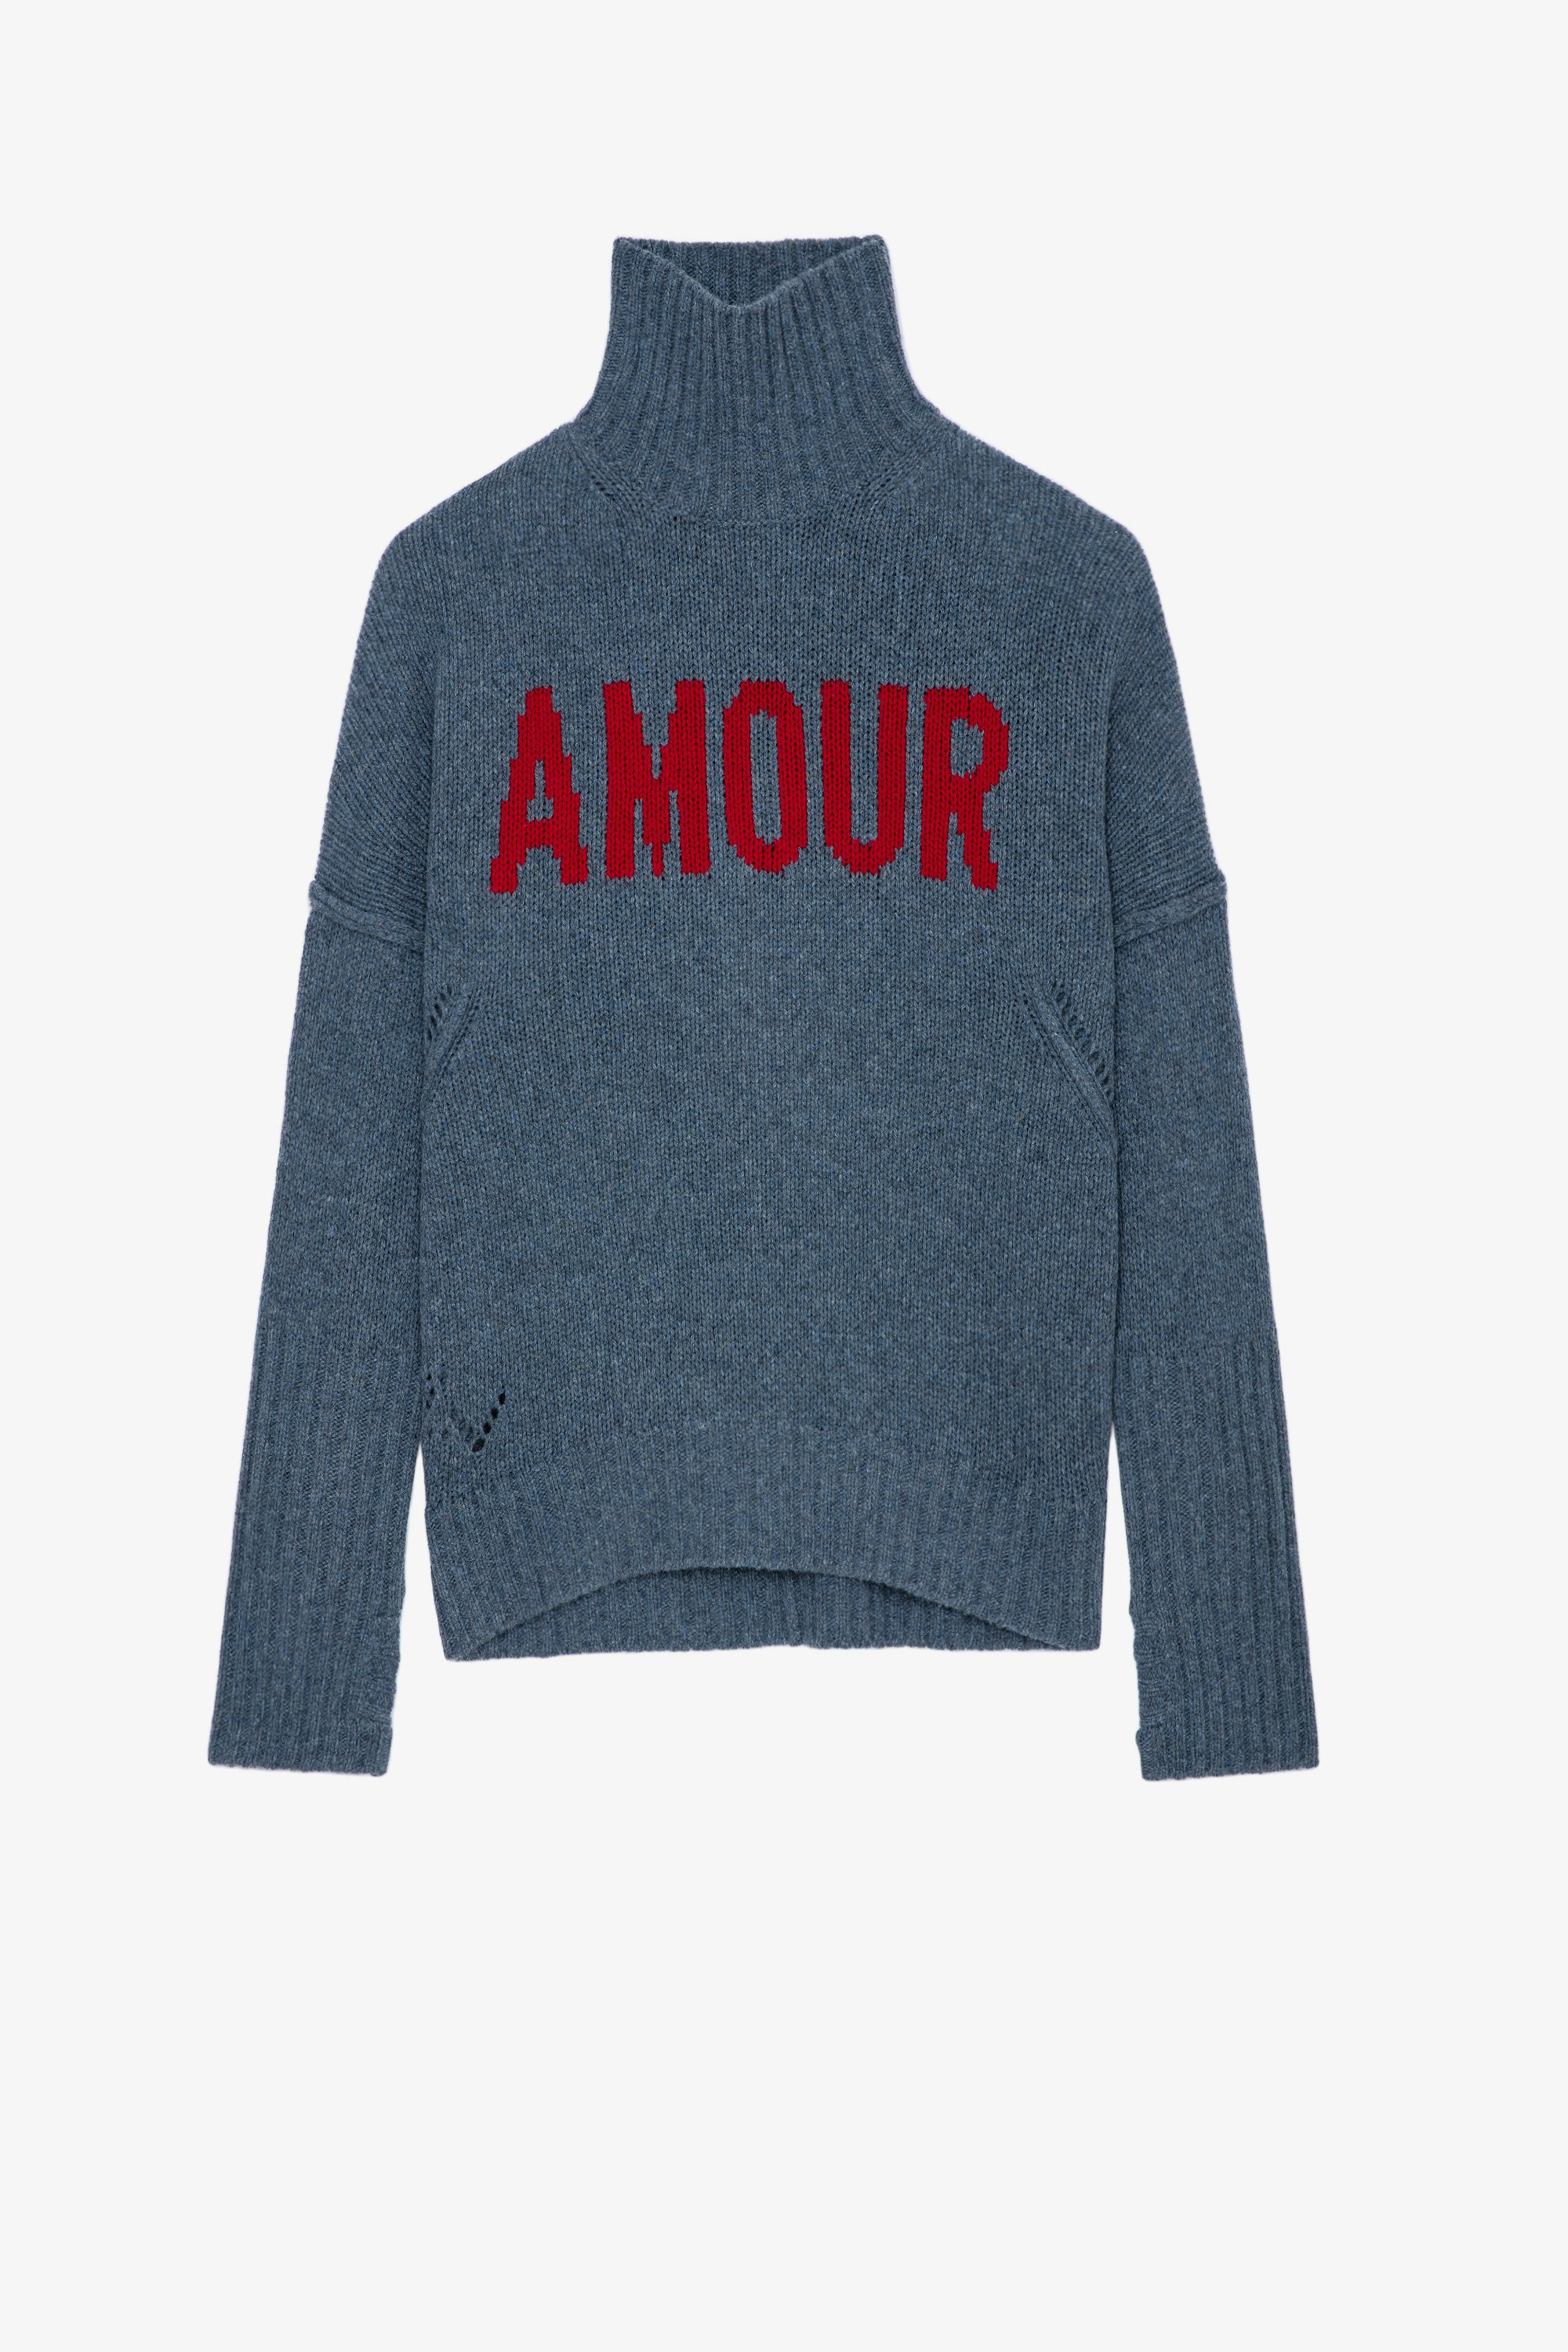 Alma Amour Jumper Women’s blue knit turtleneck jumper with contrasting “Amour” slogan 